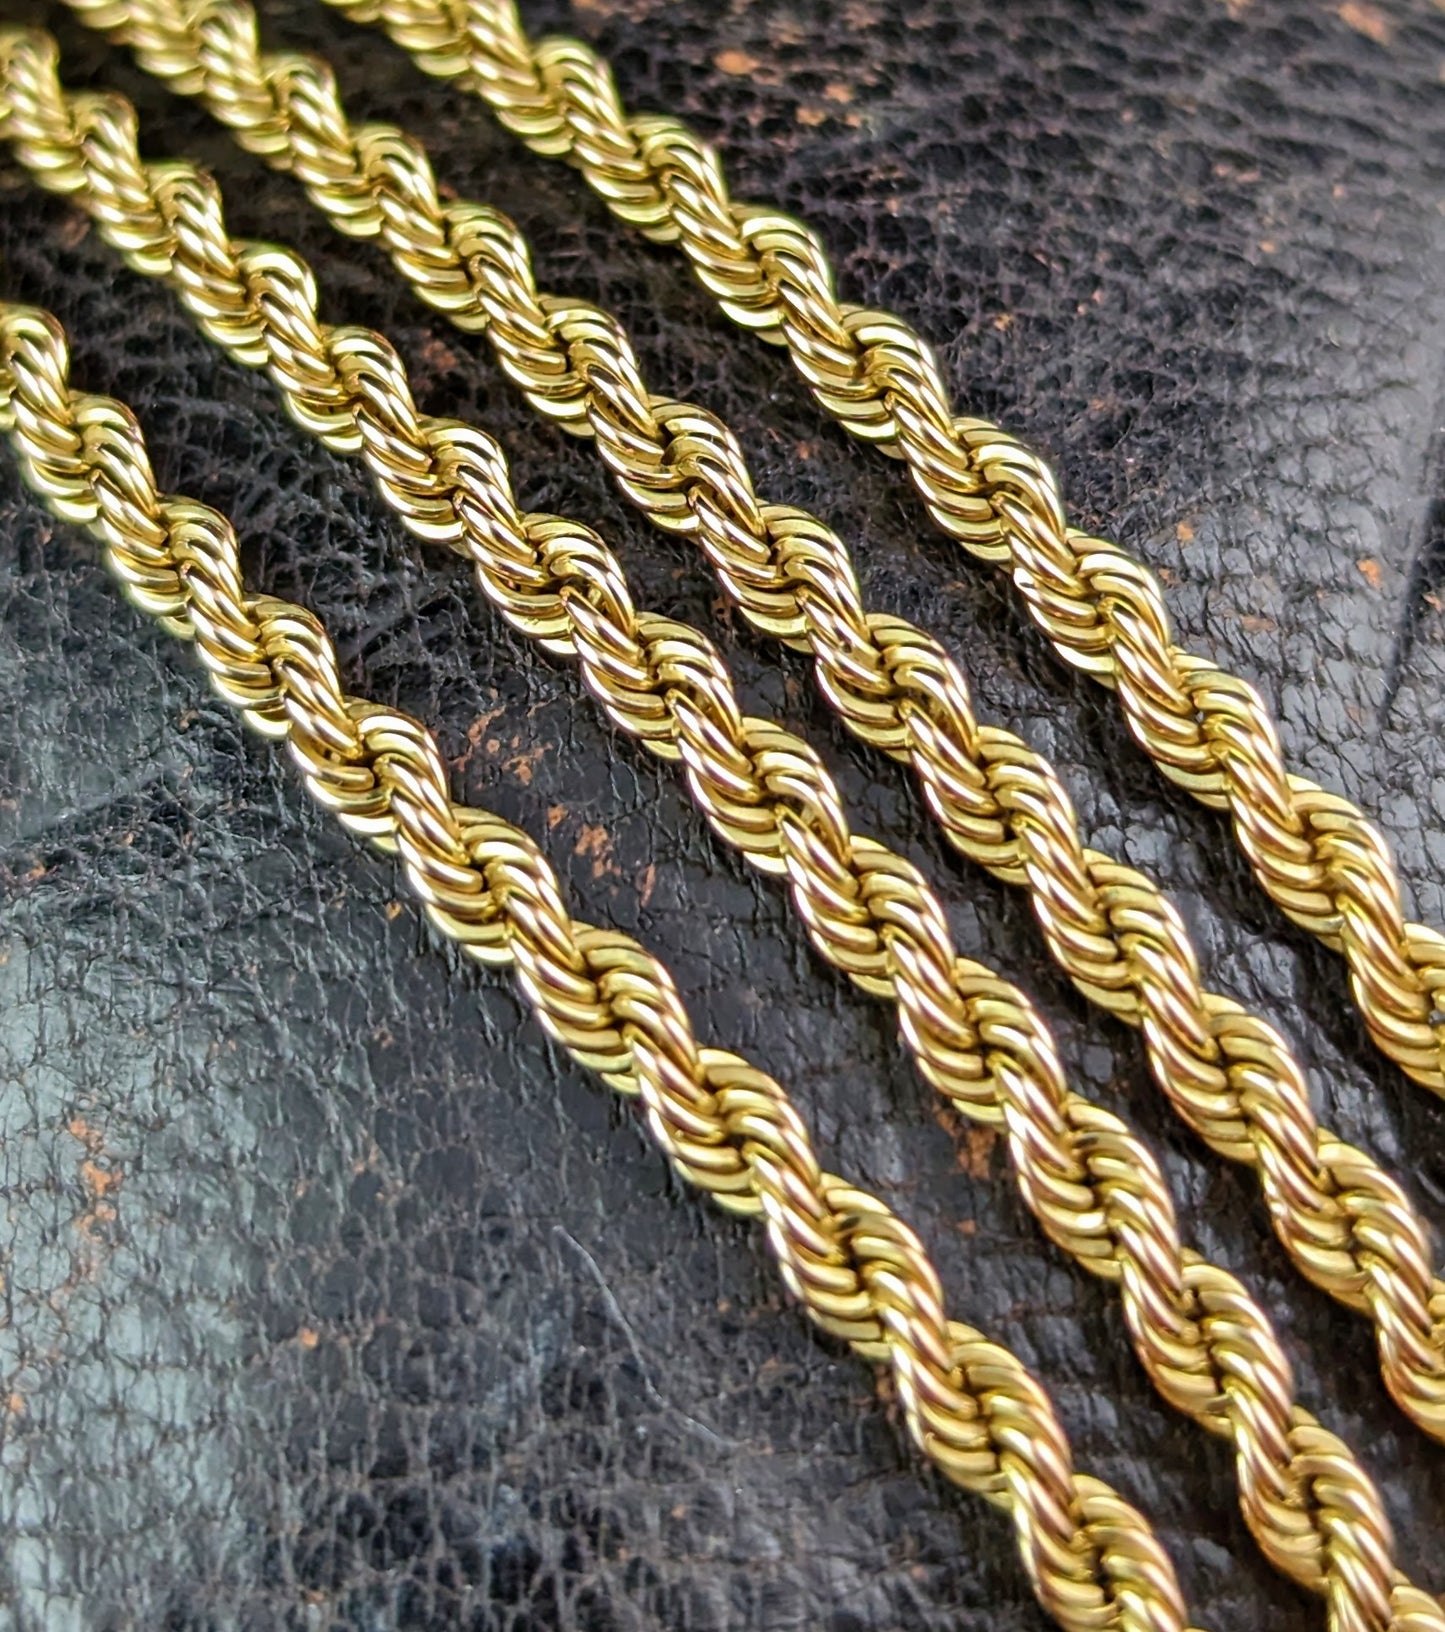 Vintage 9ct gold rope twist chain necklace